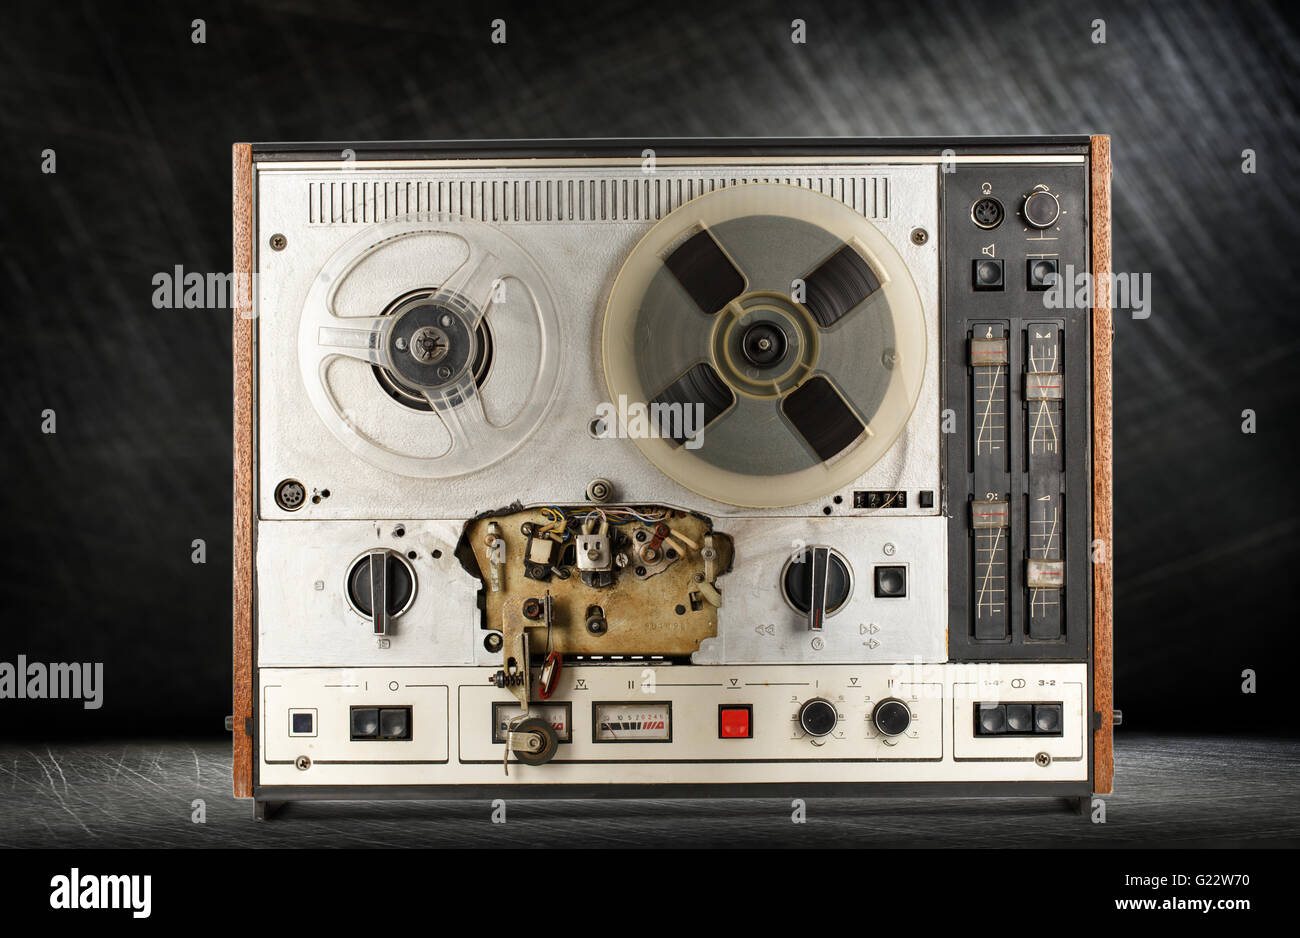 Old reel tape recorder on steel background Stock Photo - Alamy